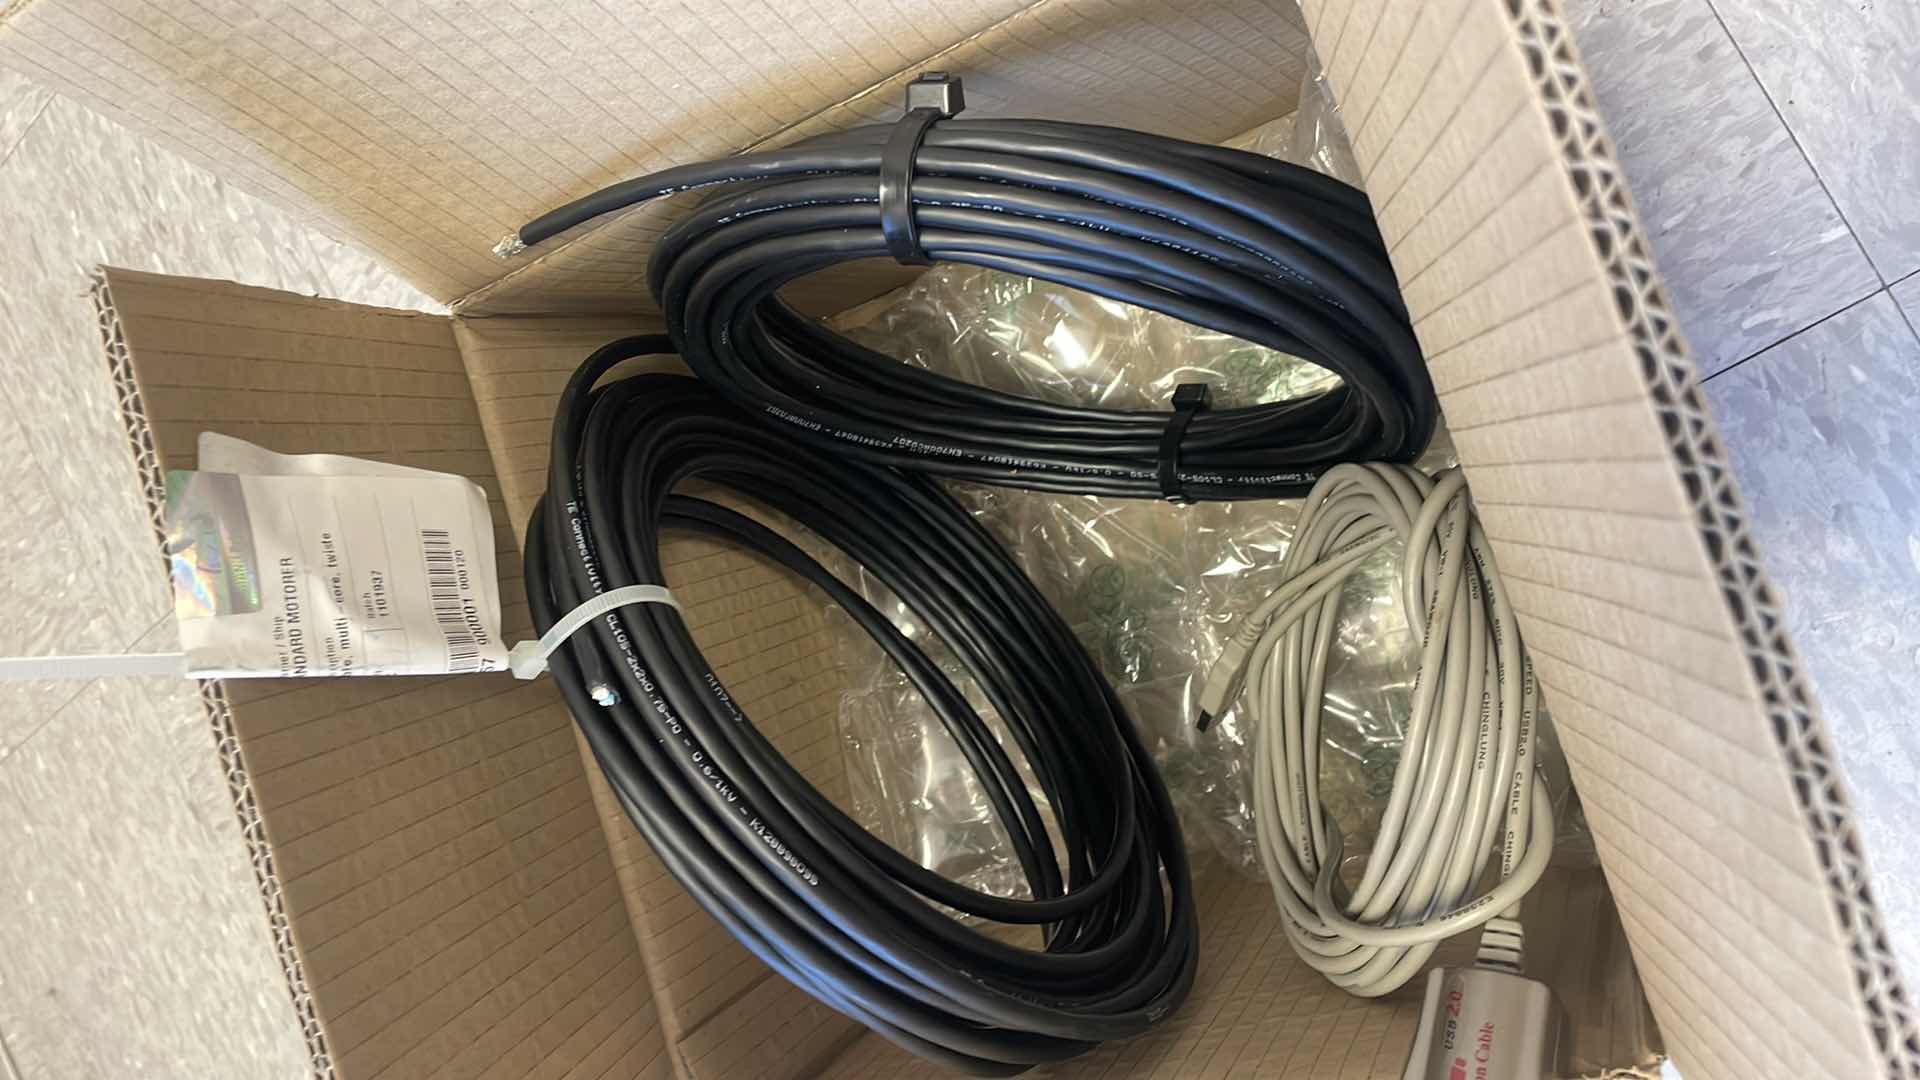 Photo 1 of STANDARD MOTORER CABLE MULTI CORE TWISTED & USB DATA EXTENSION CABLE